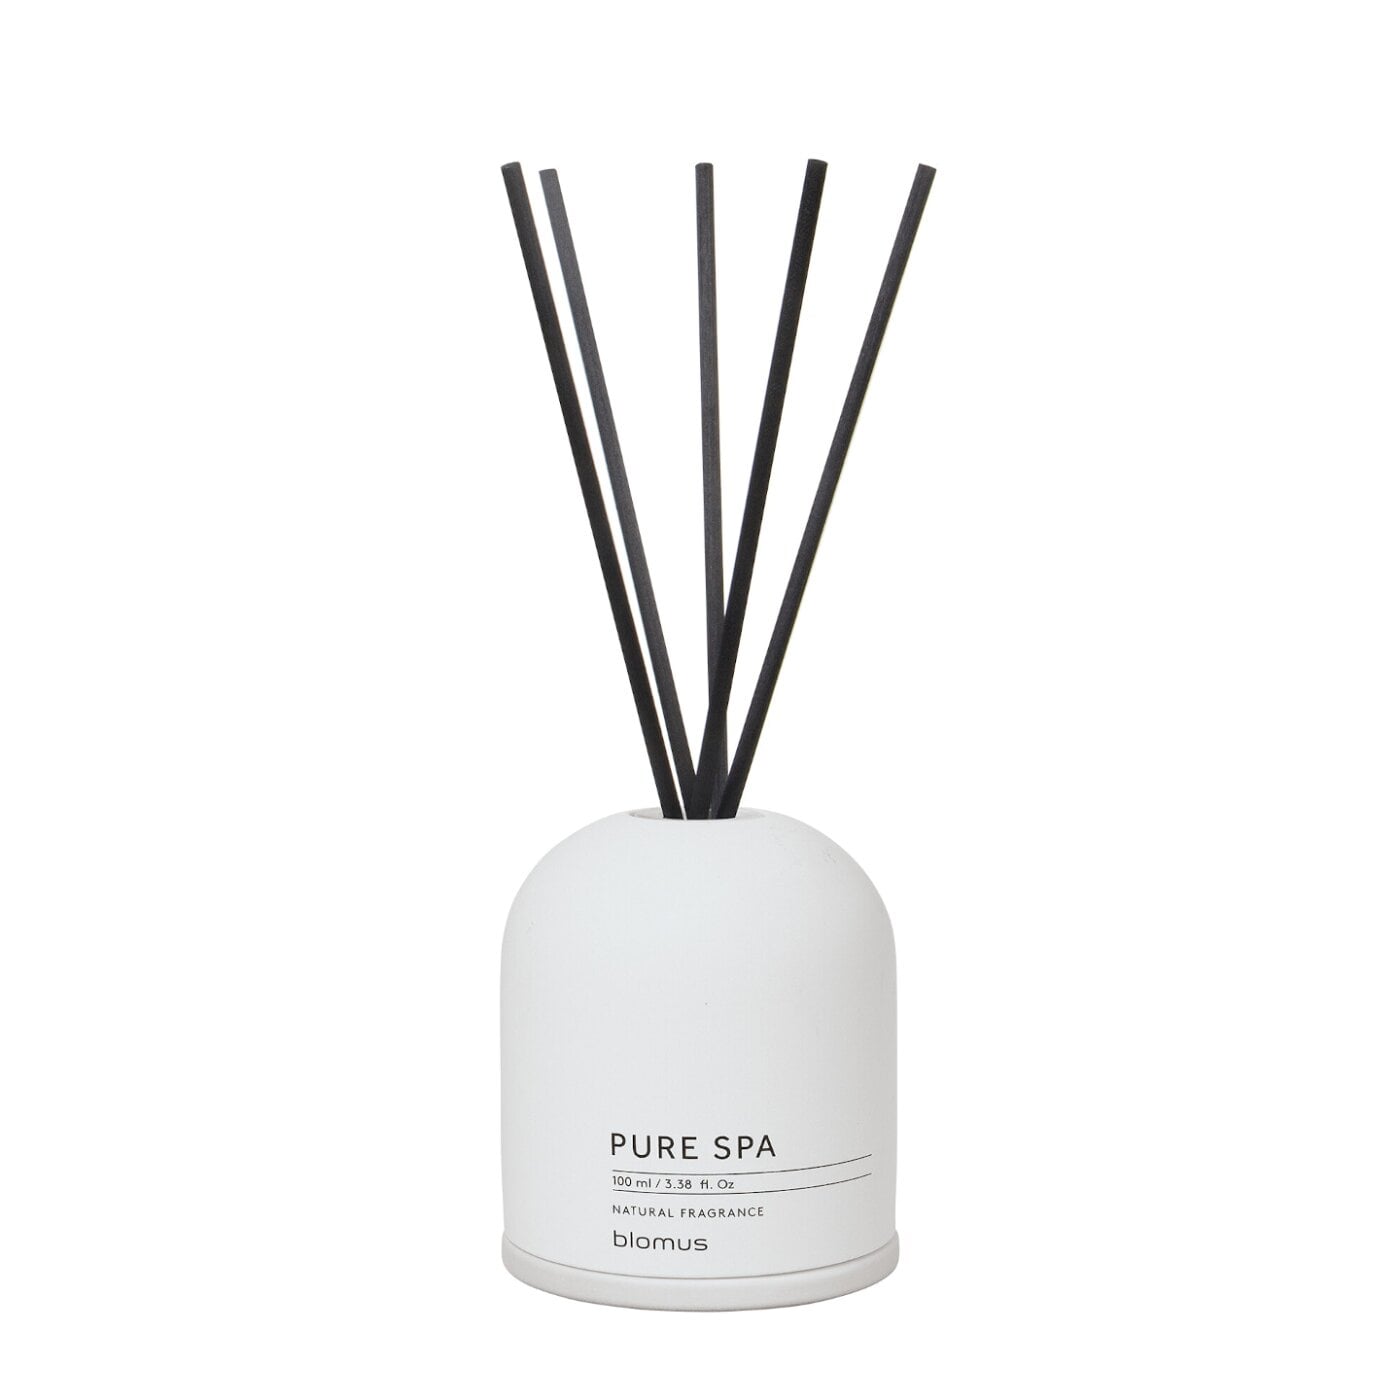 Blomus Fraga Room Diffuser - French Cotton Lilly White in White Container 100ml